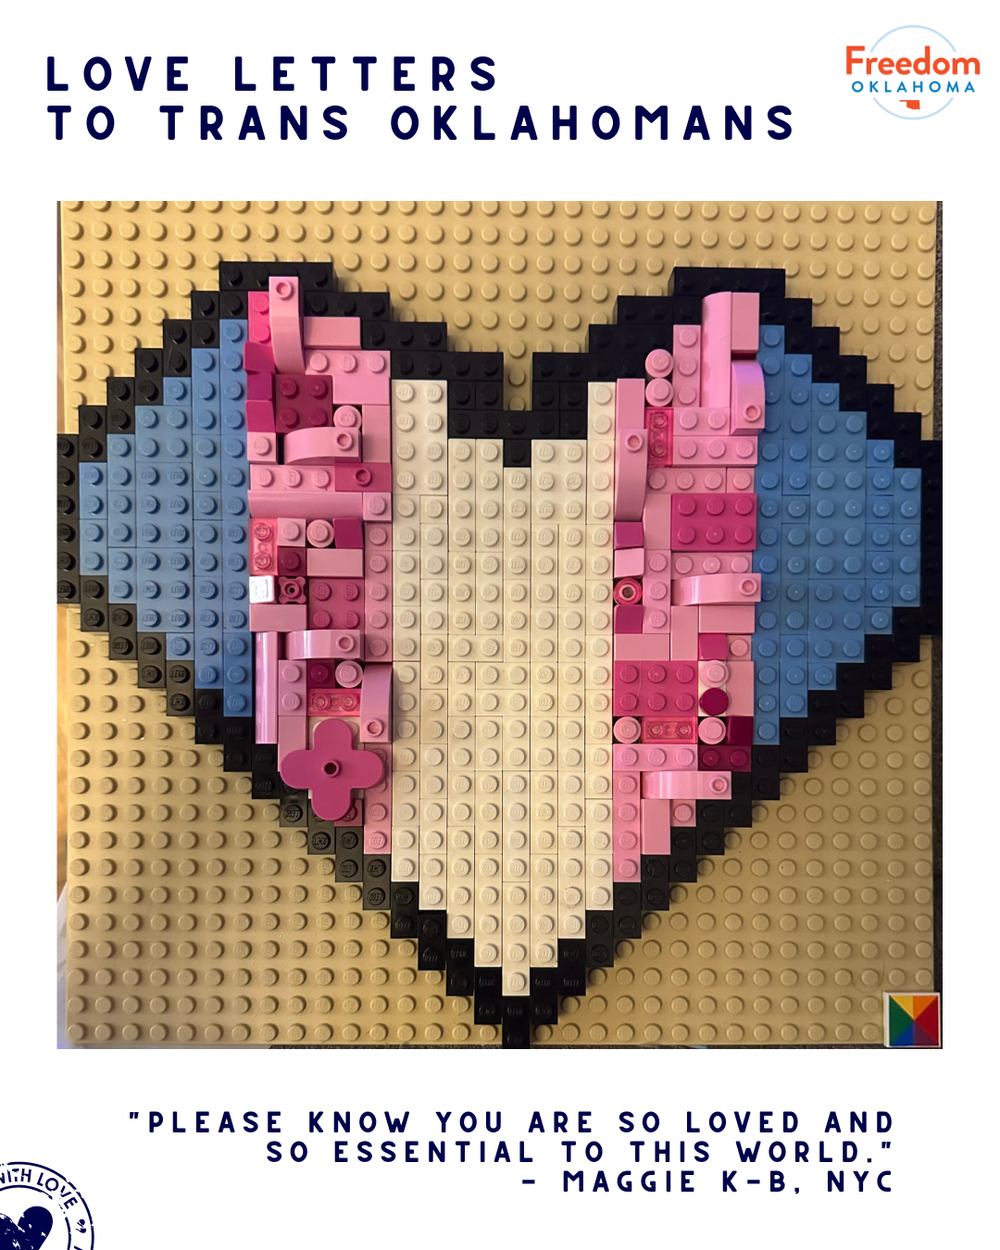  "Love Letters to Trans Oklahomans" and "Please know you are so loved and so essential to this world. - Maggie K-B, NYC" on a white graphic. In the center is an image of their art submission: A heart with strips of blue, pink, and white made out of L